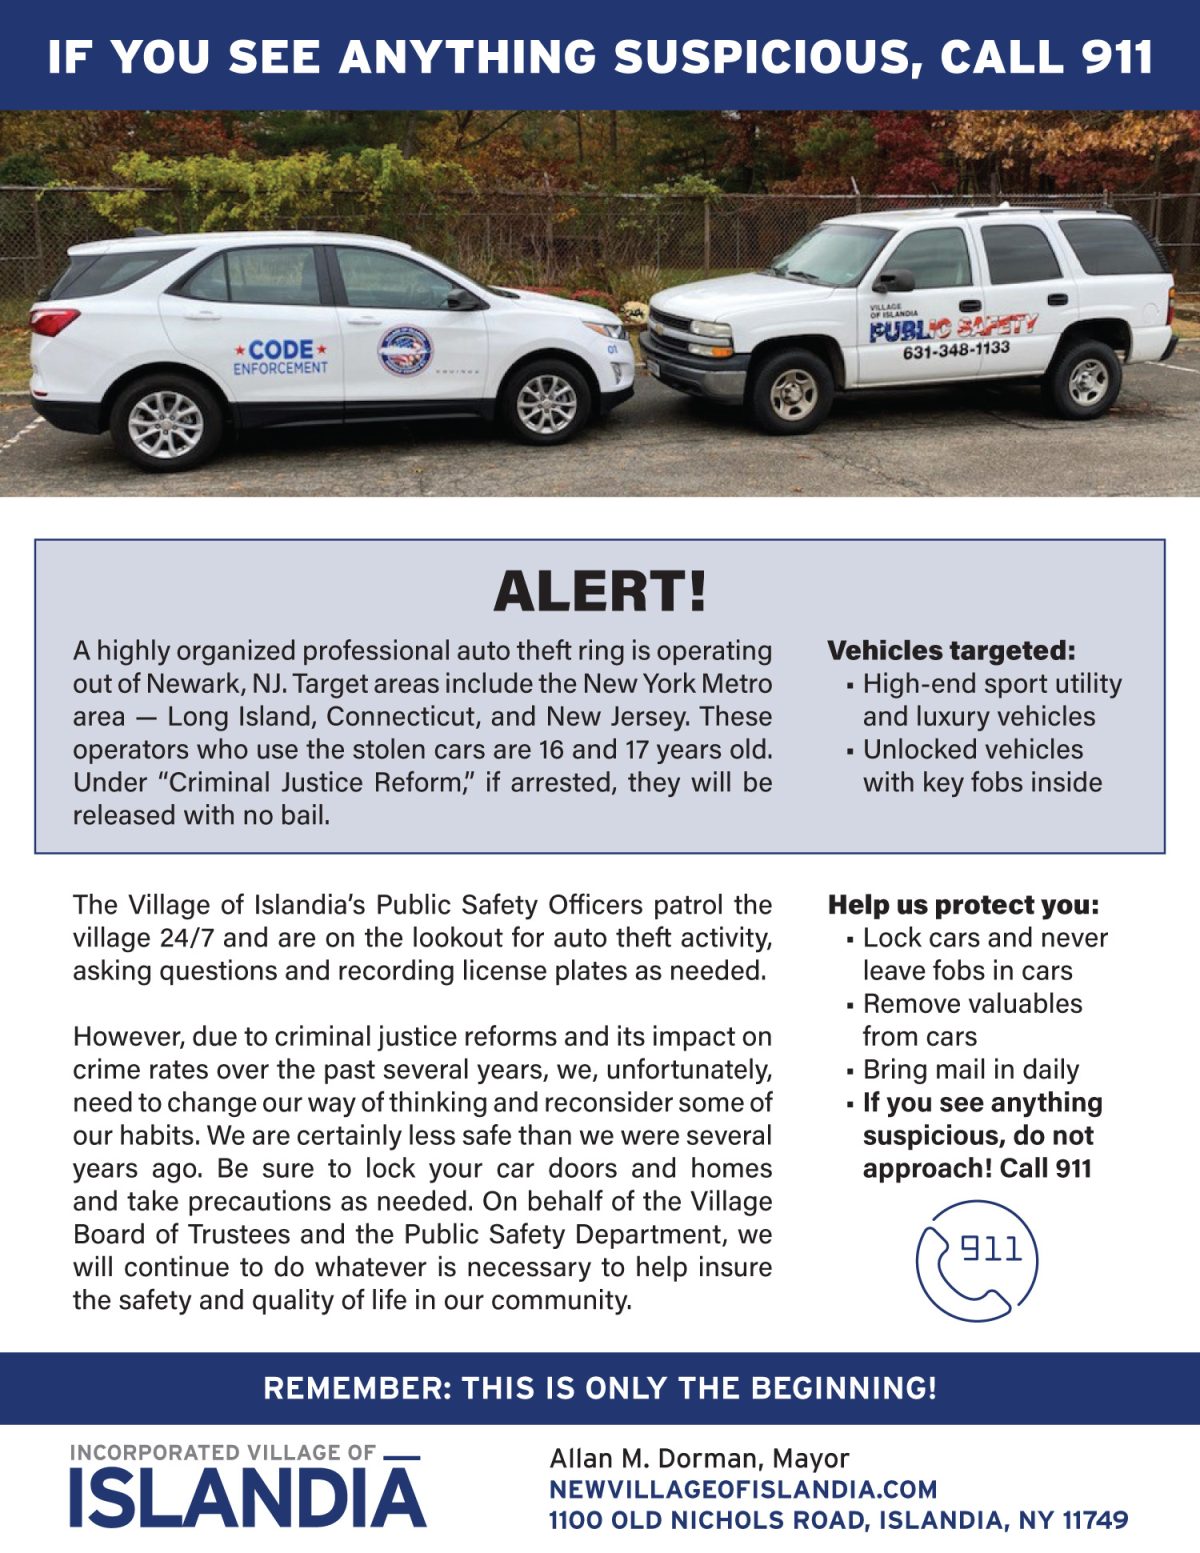 Alert! A highly organized professional auto theft ring is operating out of Newark, NJ.